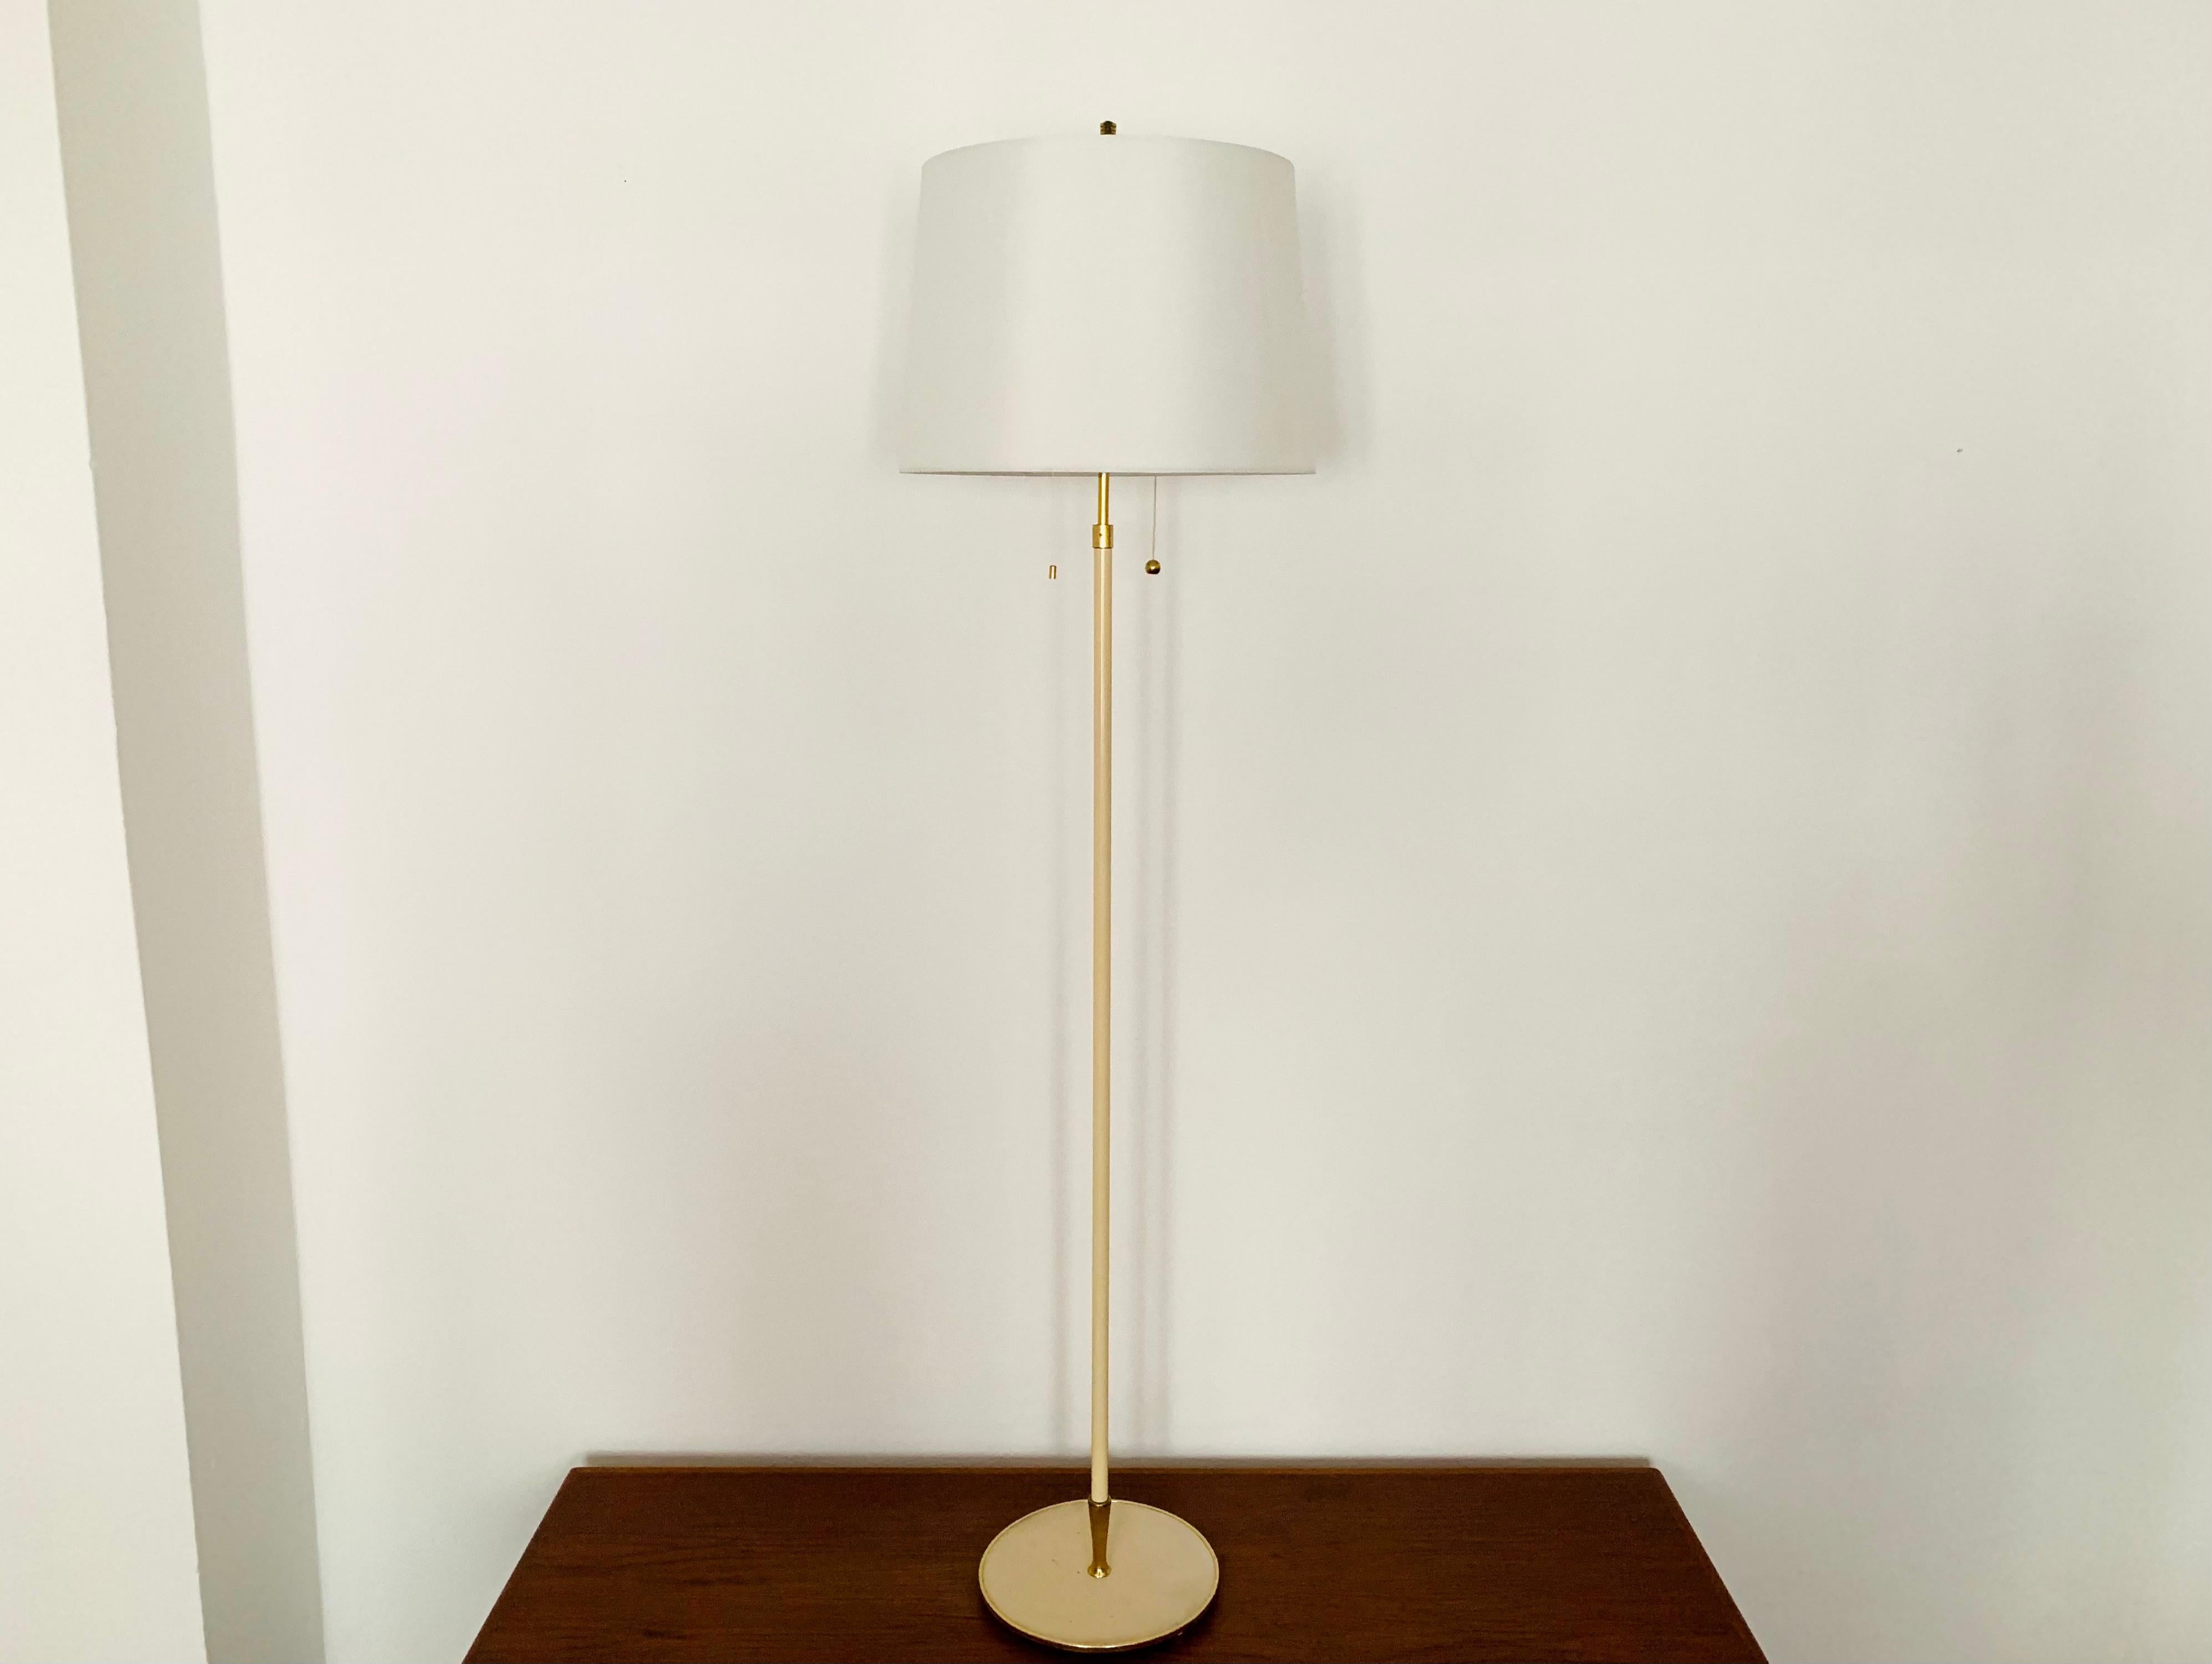 Very nice floor lamp from the 1950s.
Great design and very high quality workmanship.
The loving details and the very pleasant lighting effect make the lamp special and a real favorite.

Manufacturer: Vereinigte Werkstätten